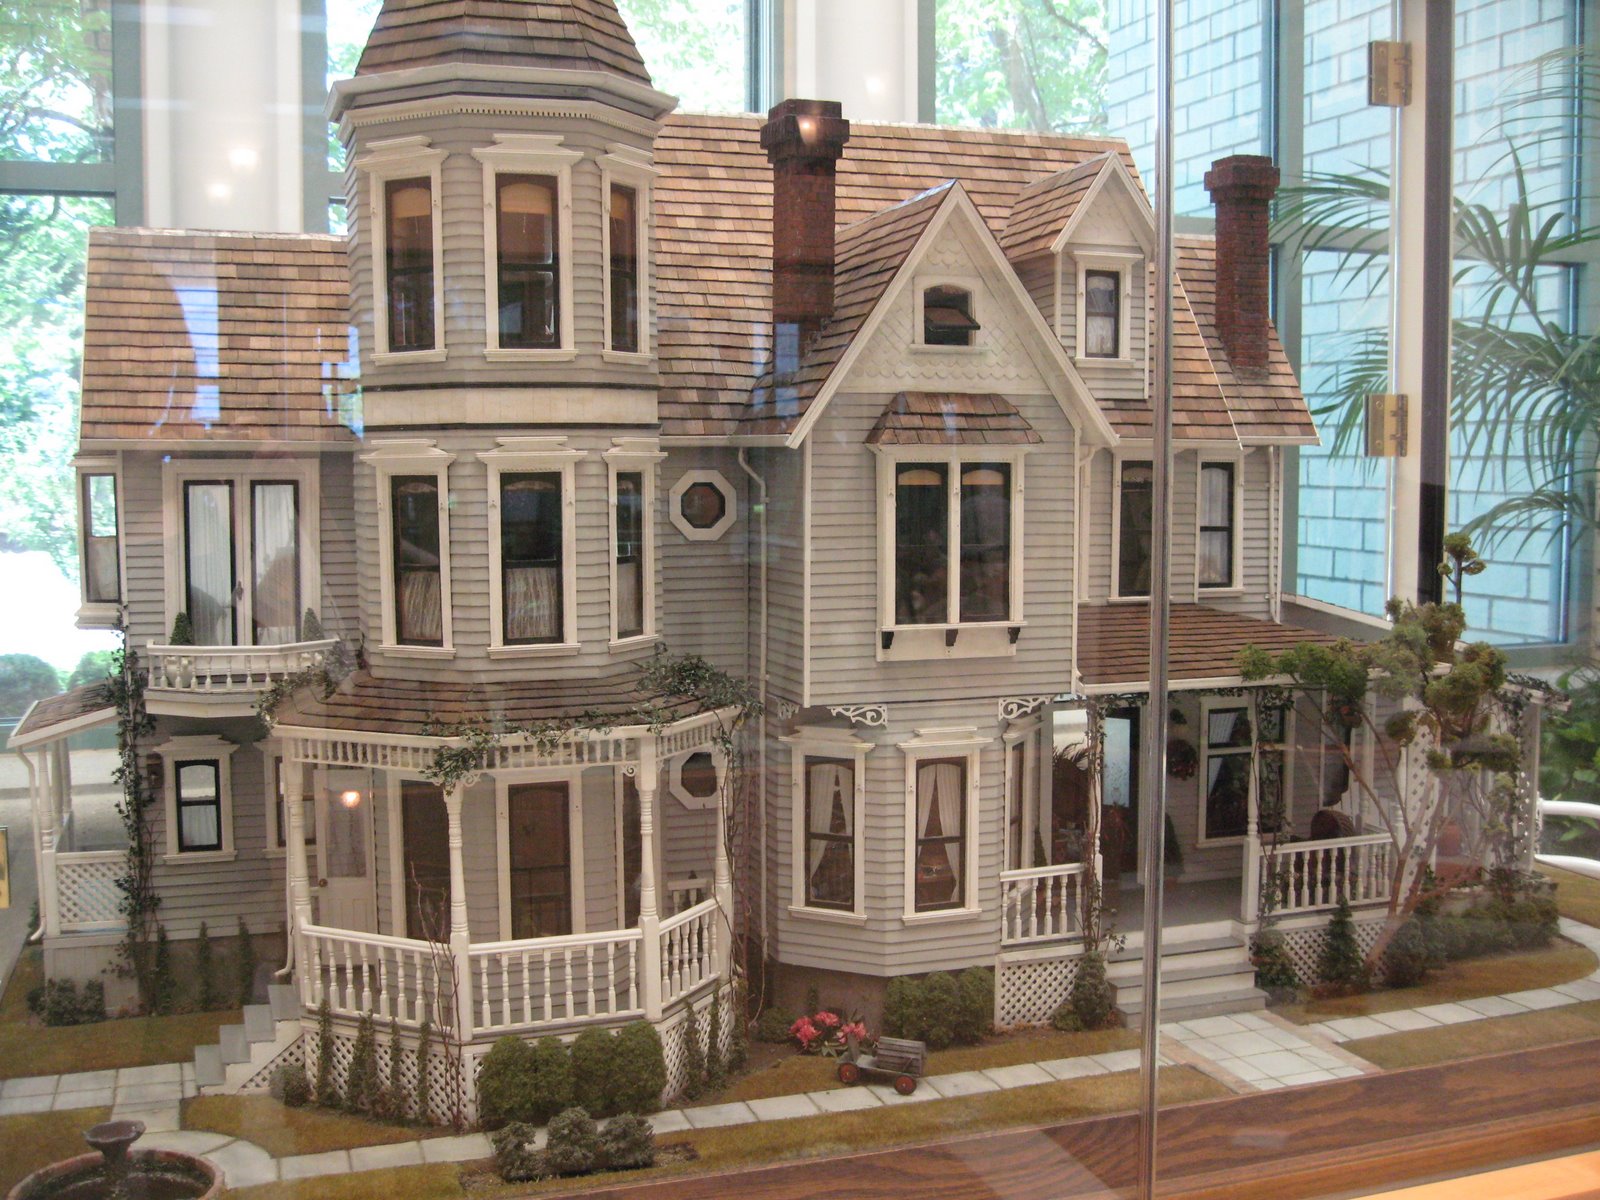 CHILDHOOD DREAMS: Doll House Read Till You Drop